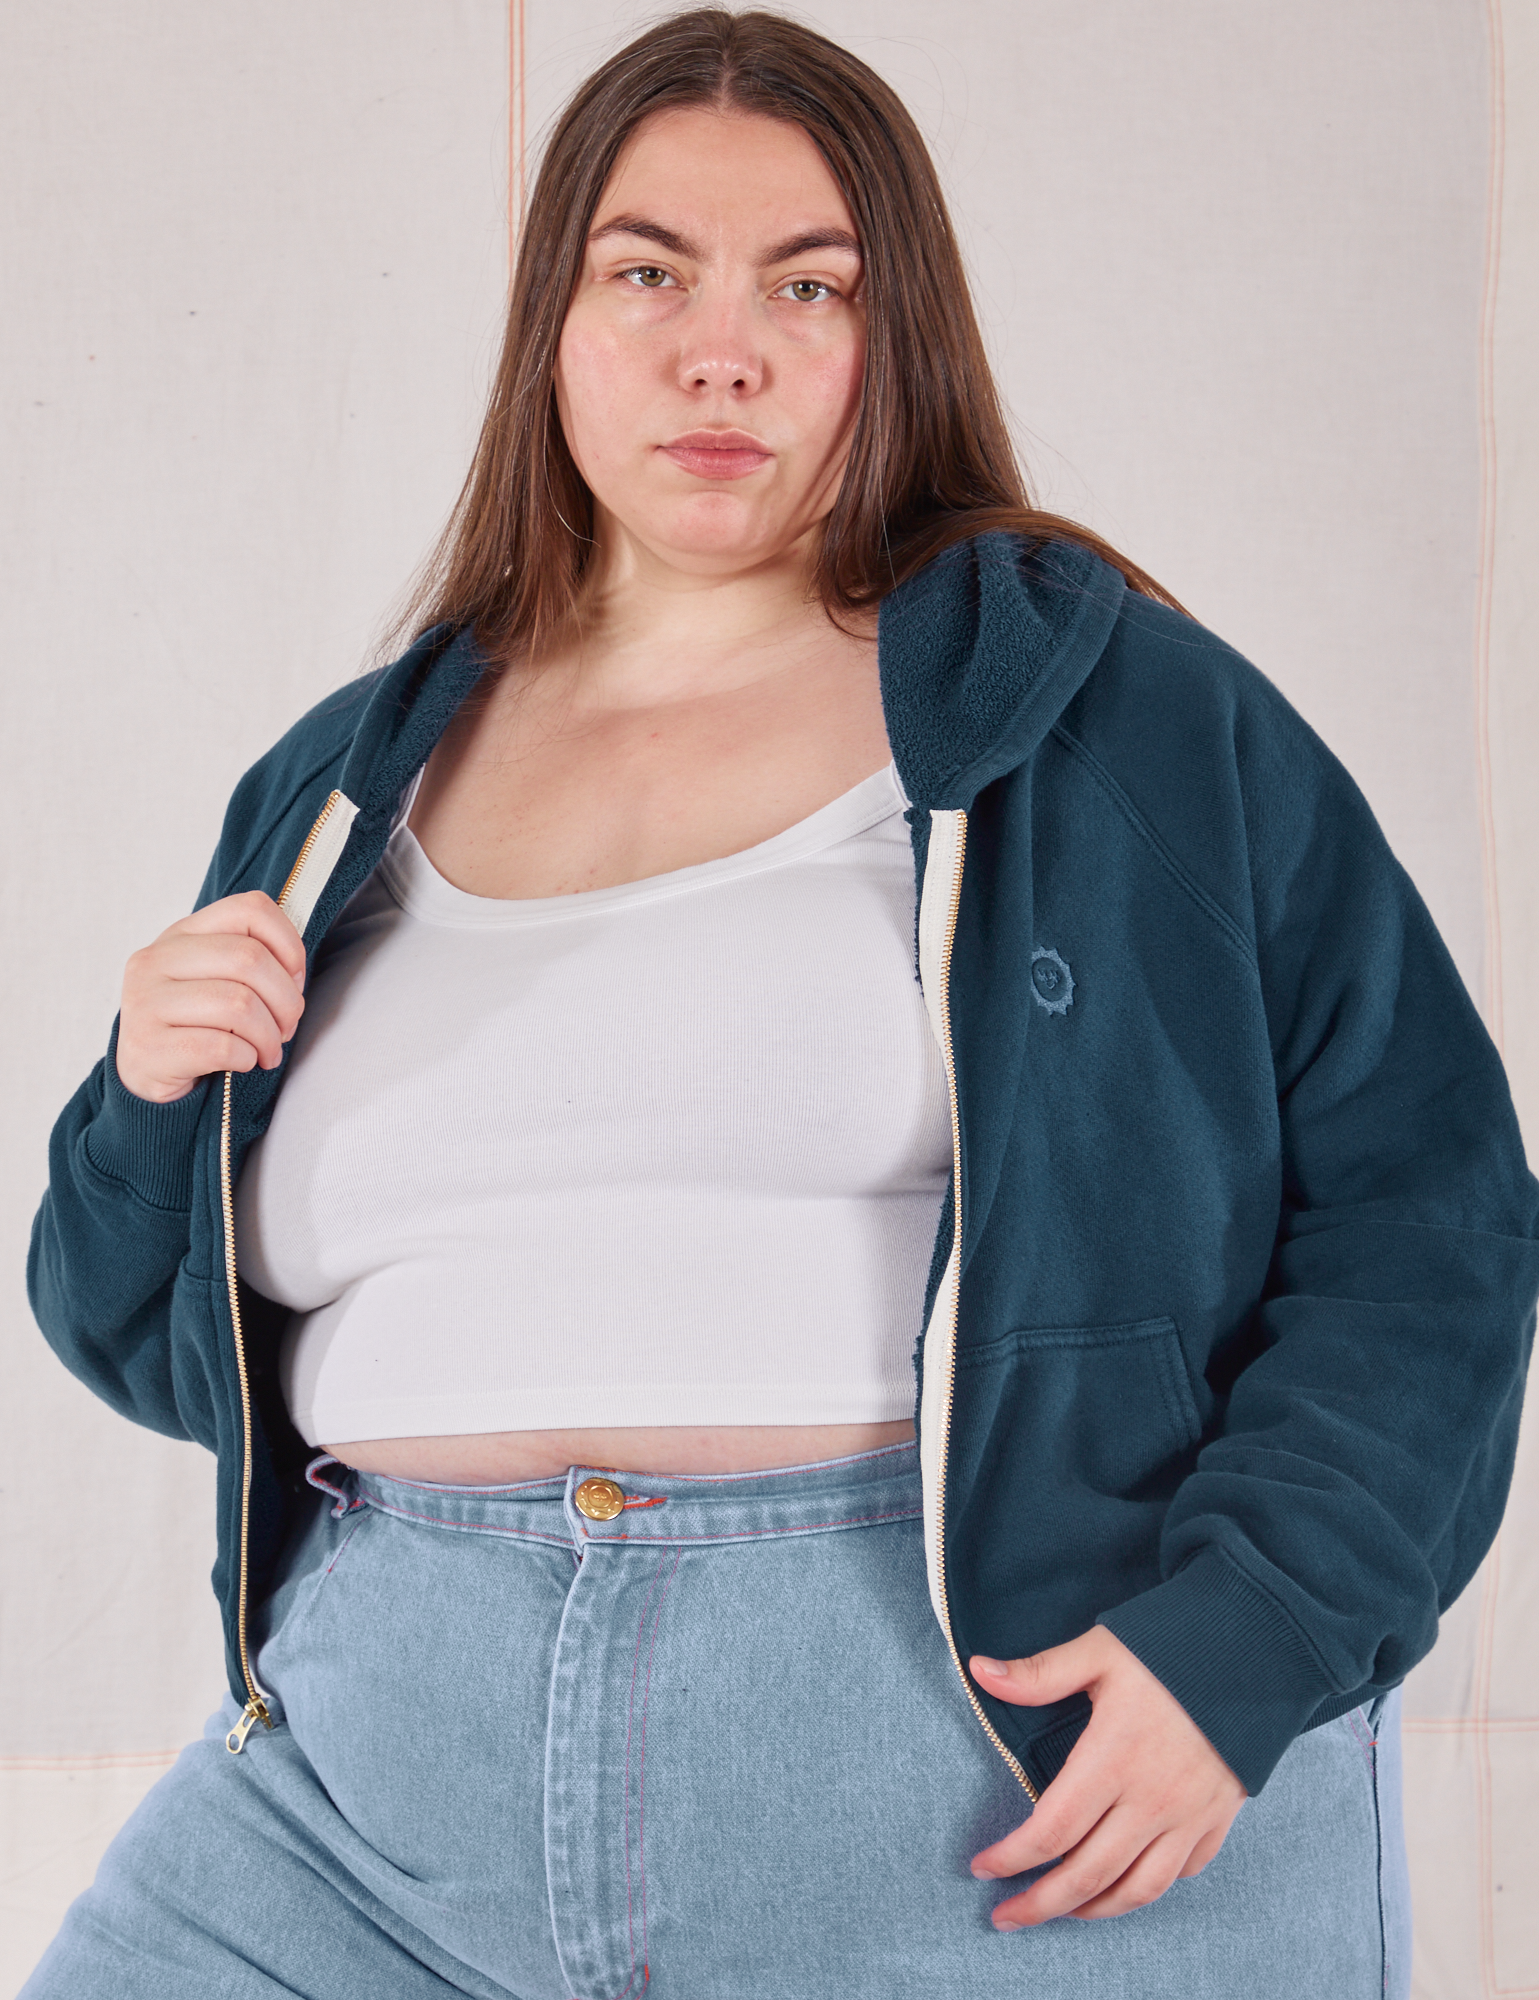 Marielena is wearing Cropped Zip Hoodie in Lagoon and a vintage off-white Cropped Tank